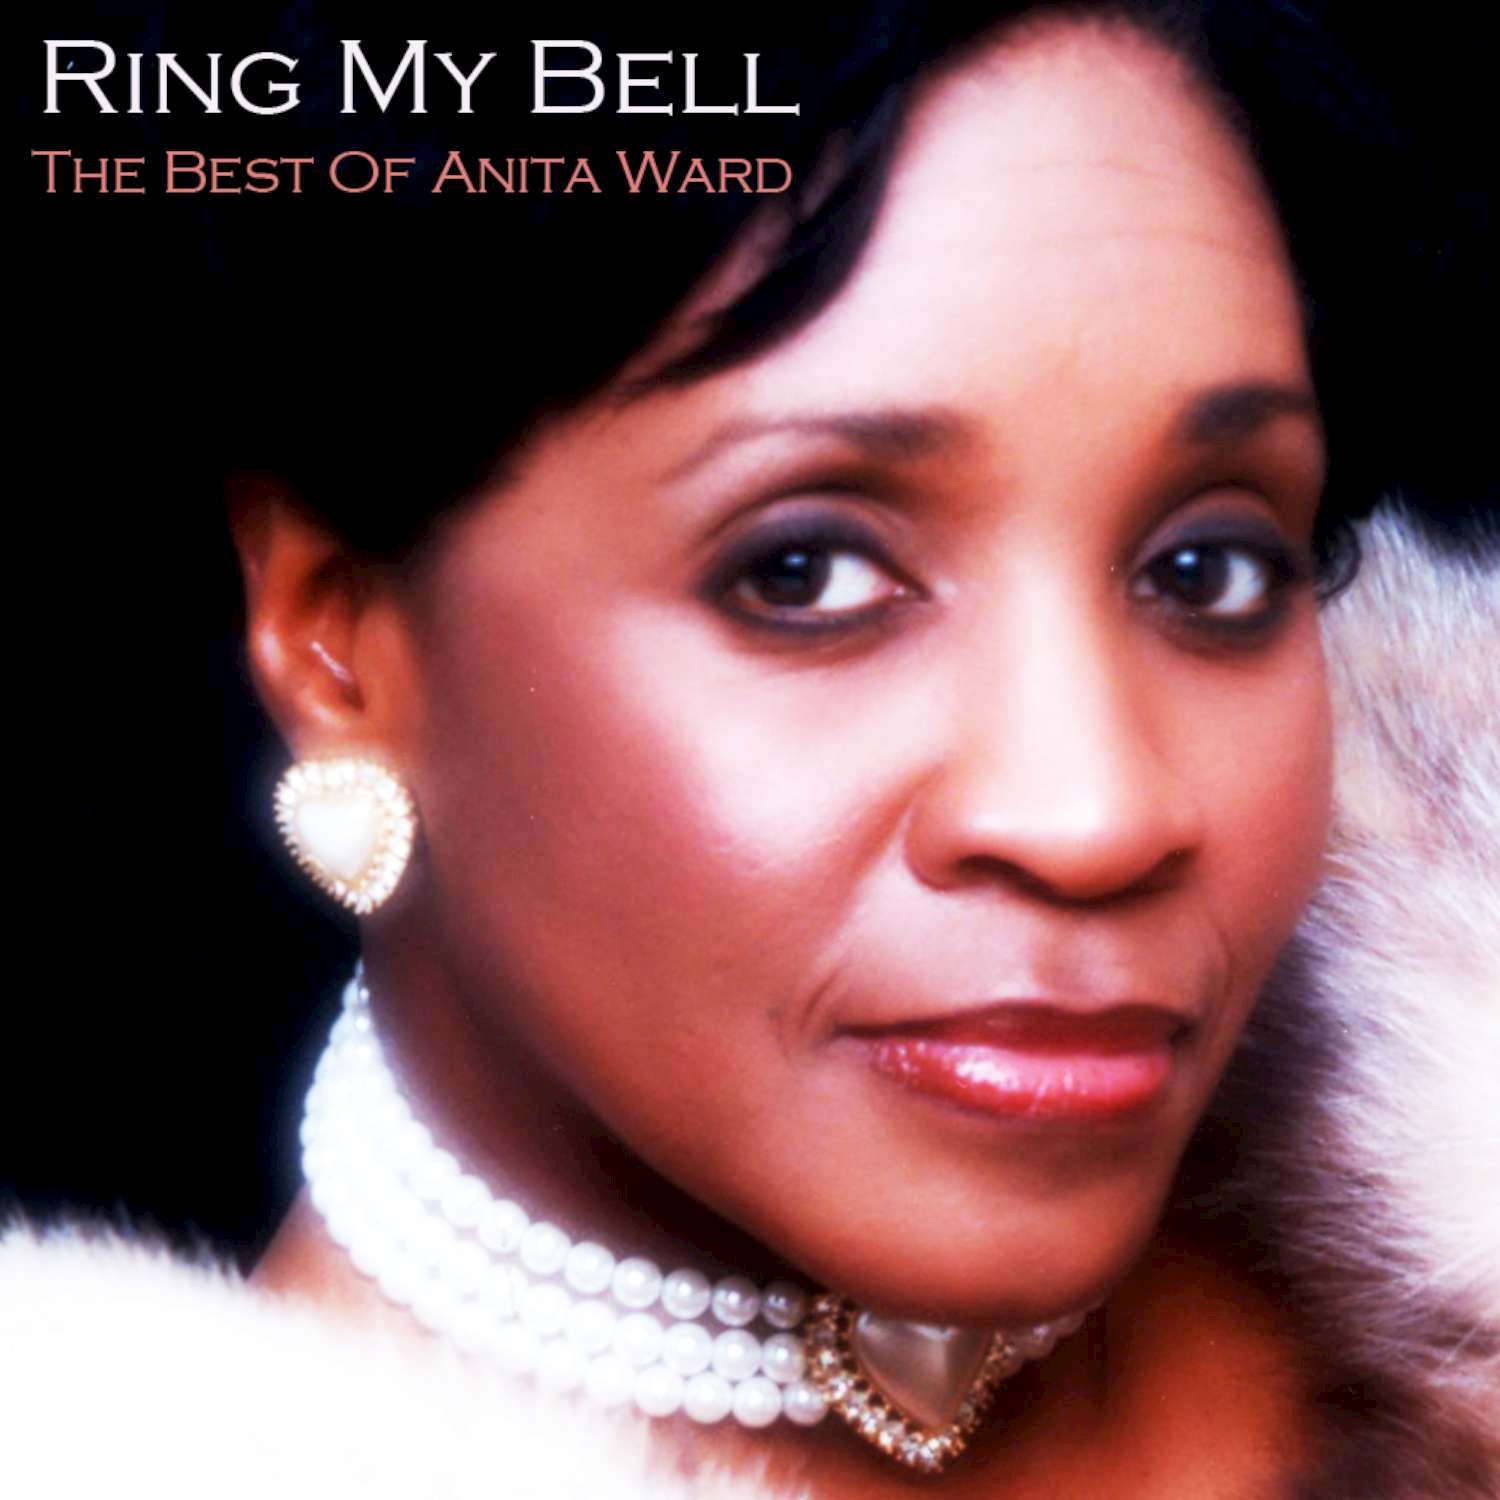 Ring My Bell - The Best of Anita Ward